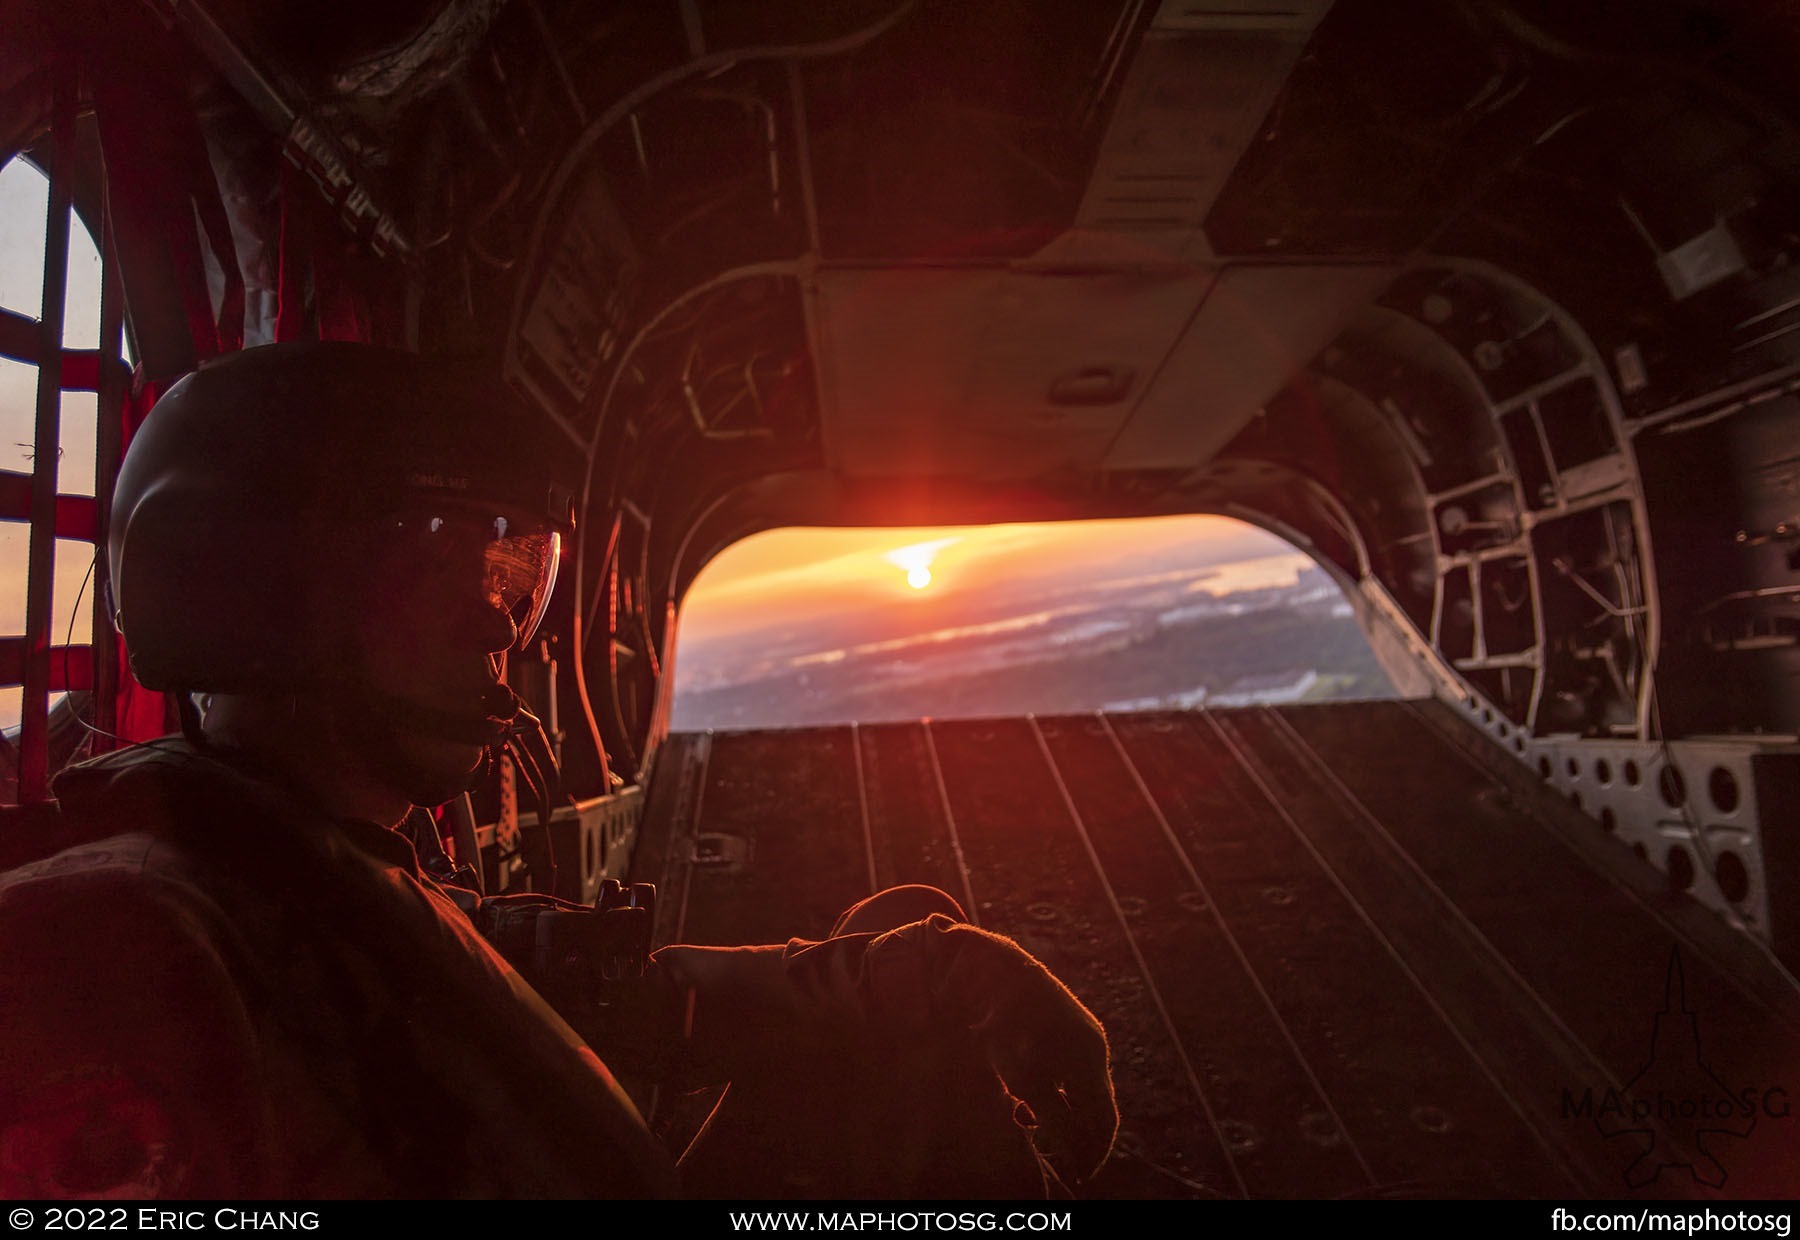 Setting sun peaks through the rear door of the Chinook